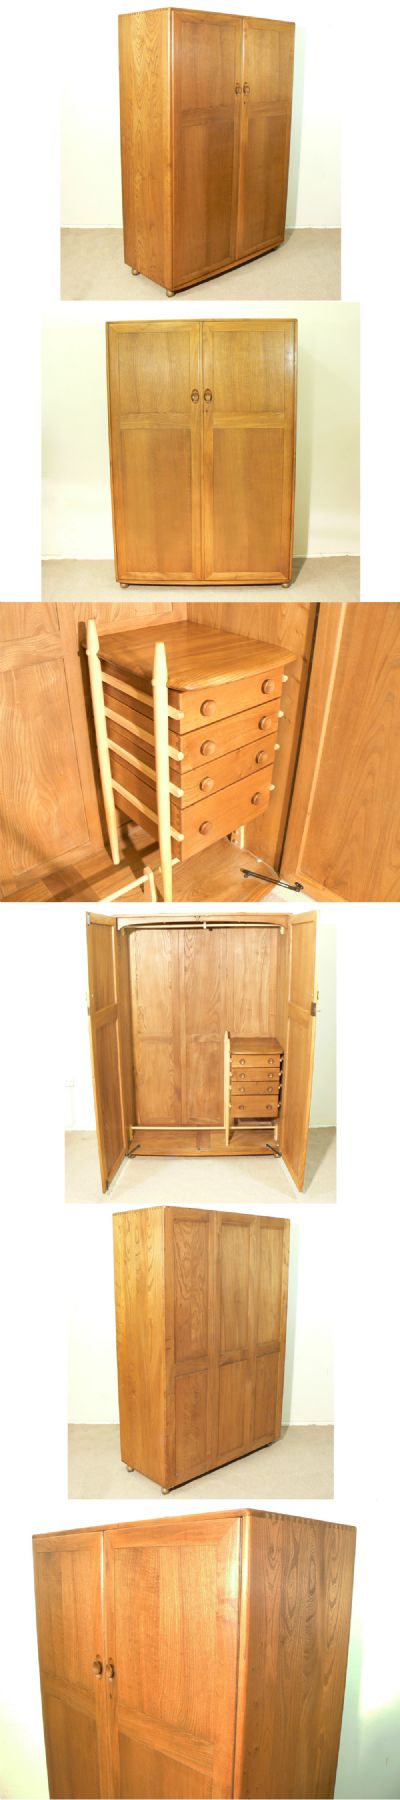 A large Ercol wardrobe, c1970s. Superbly constructed of solid elm, with beech fittings to the interior.